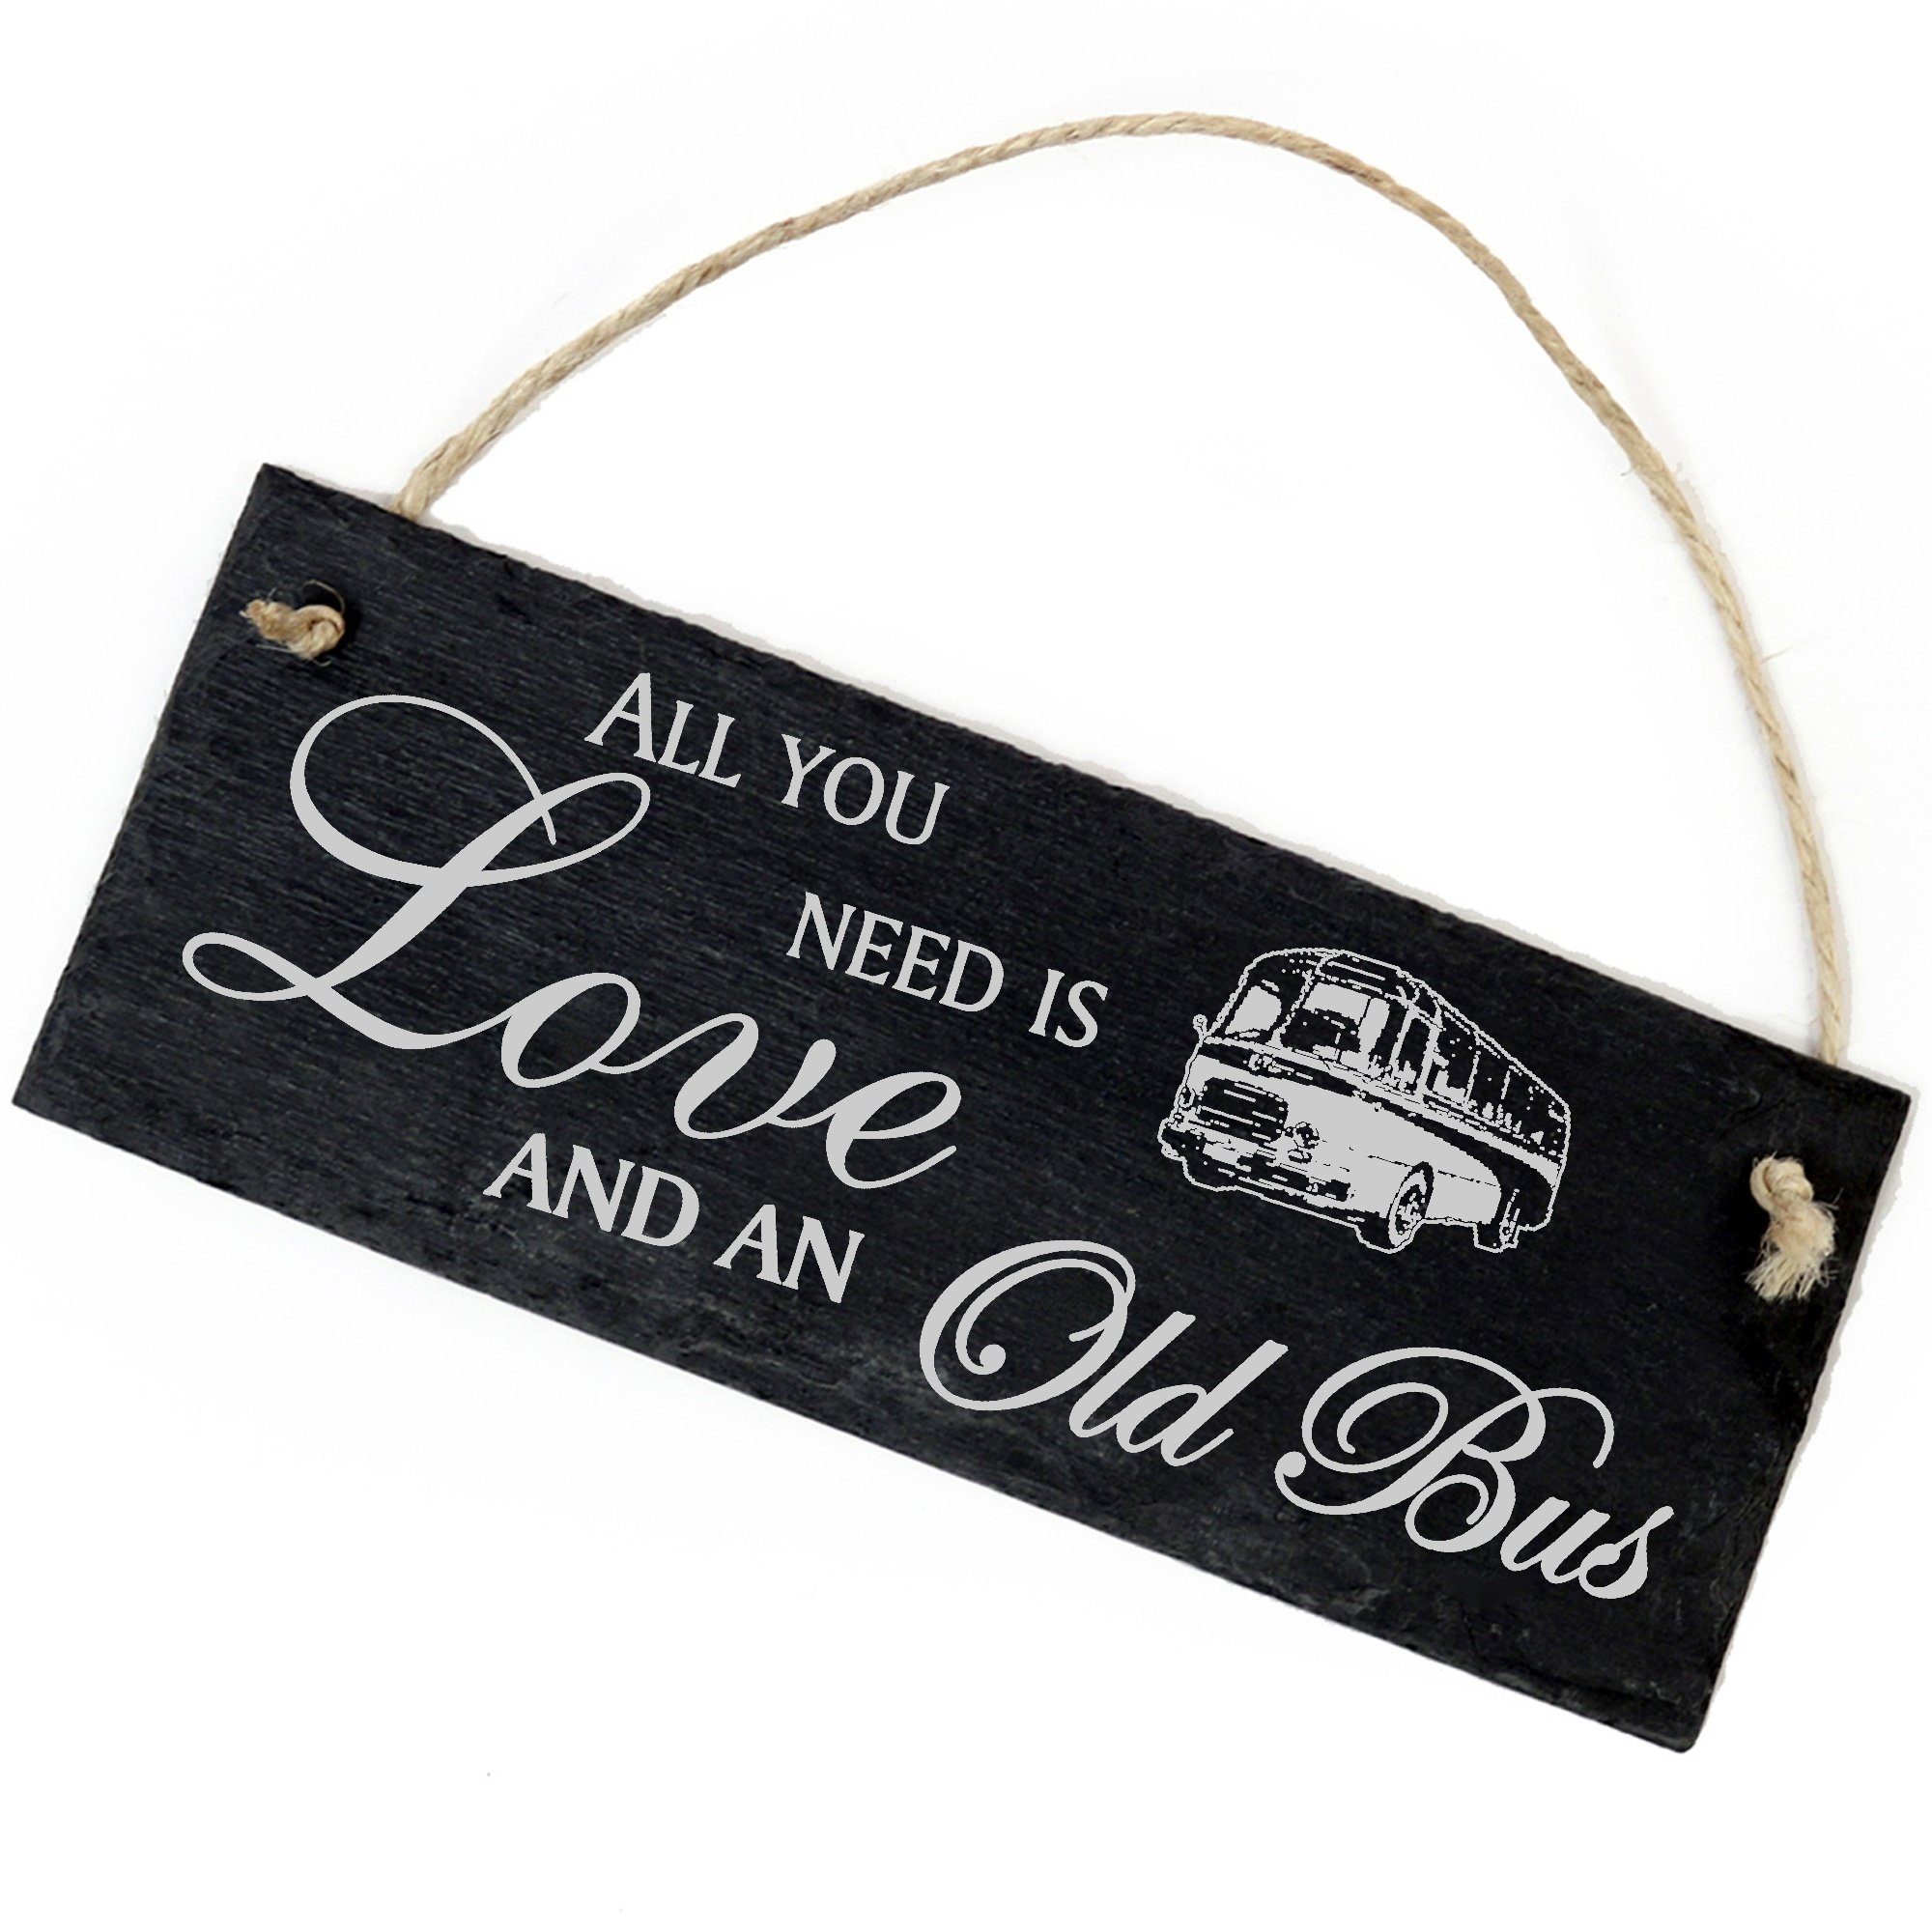 Dekolando Hängedekoration alter Bus 22x8cm All you need is Love and an Old Bus